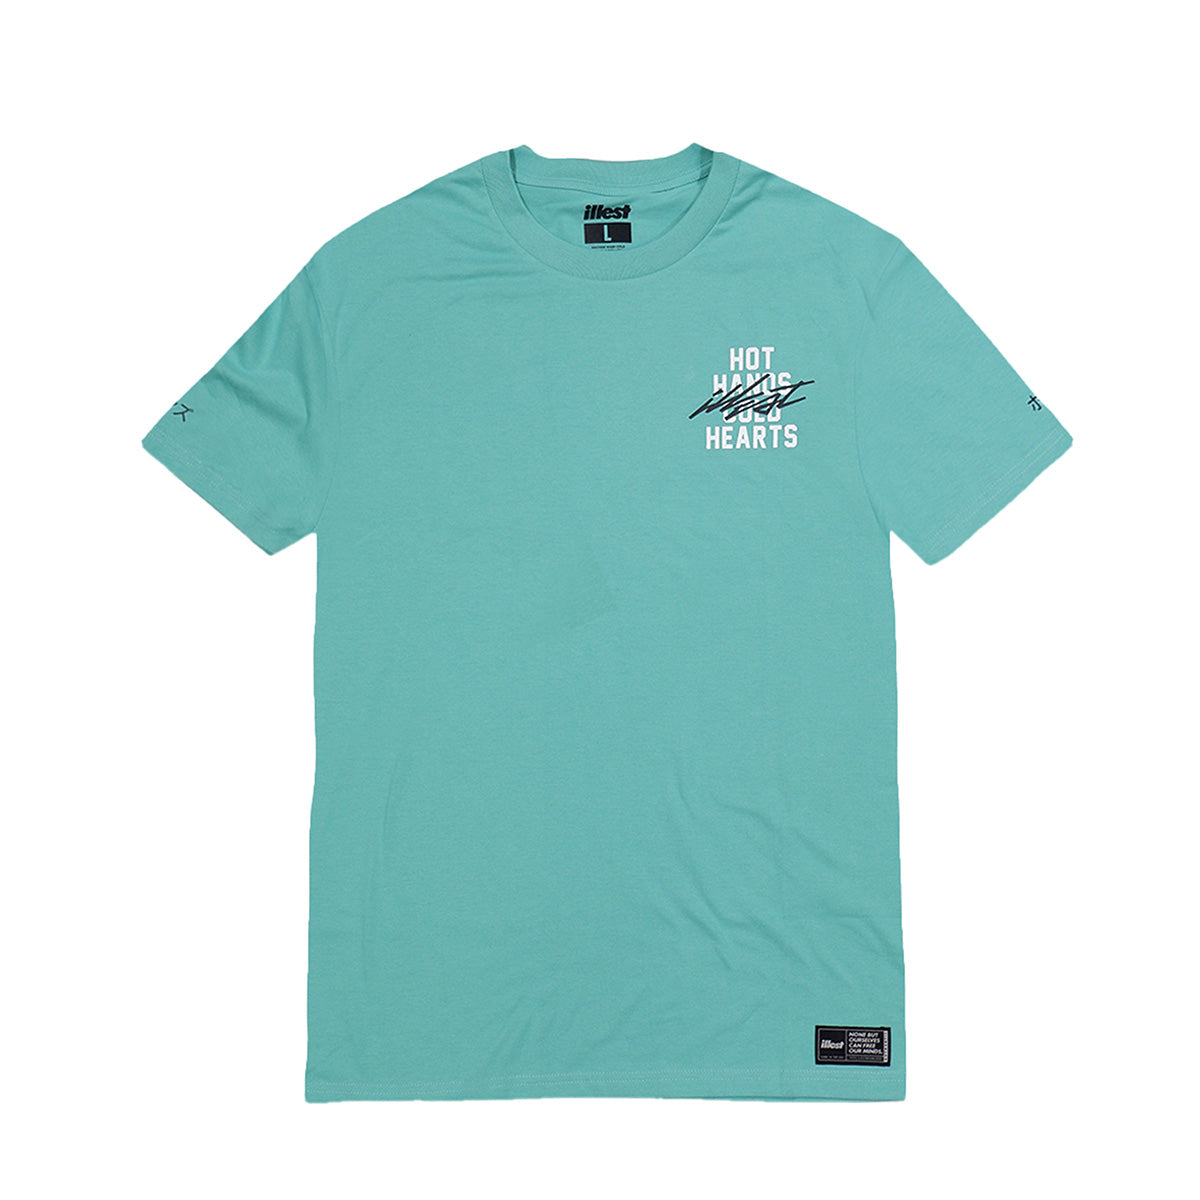 HOT HANDS COLD HEARTS TEE - TEAL